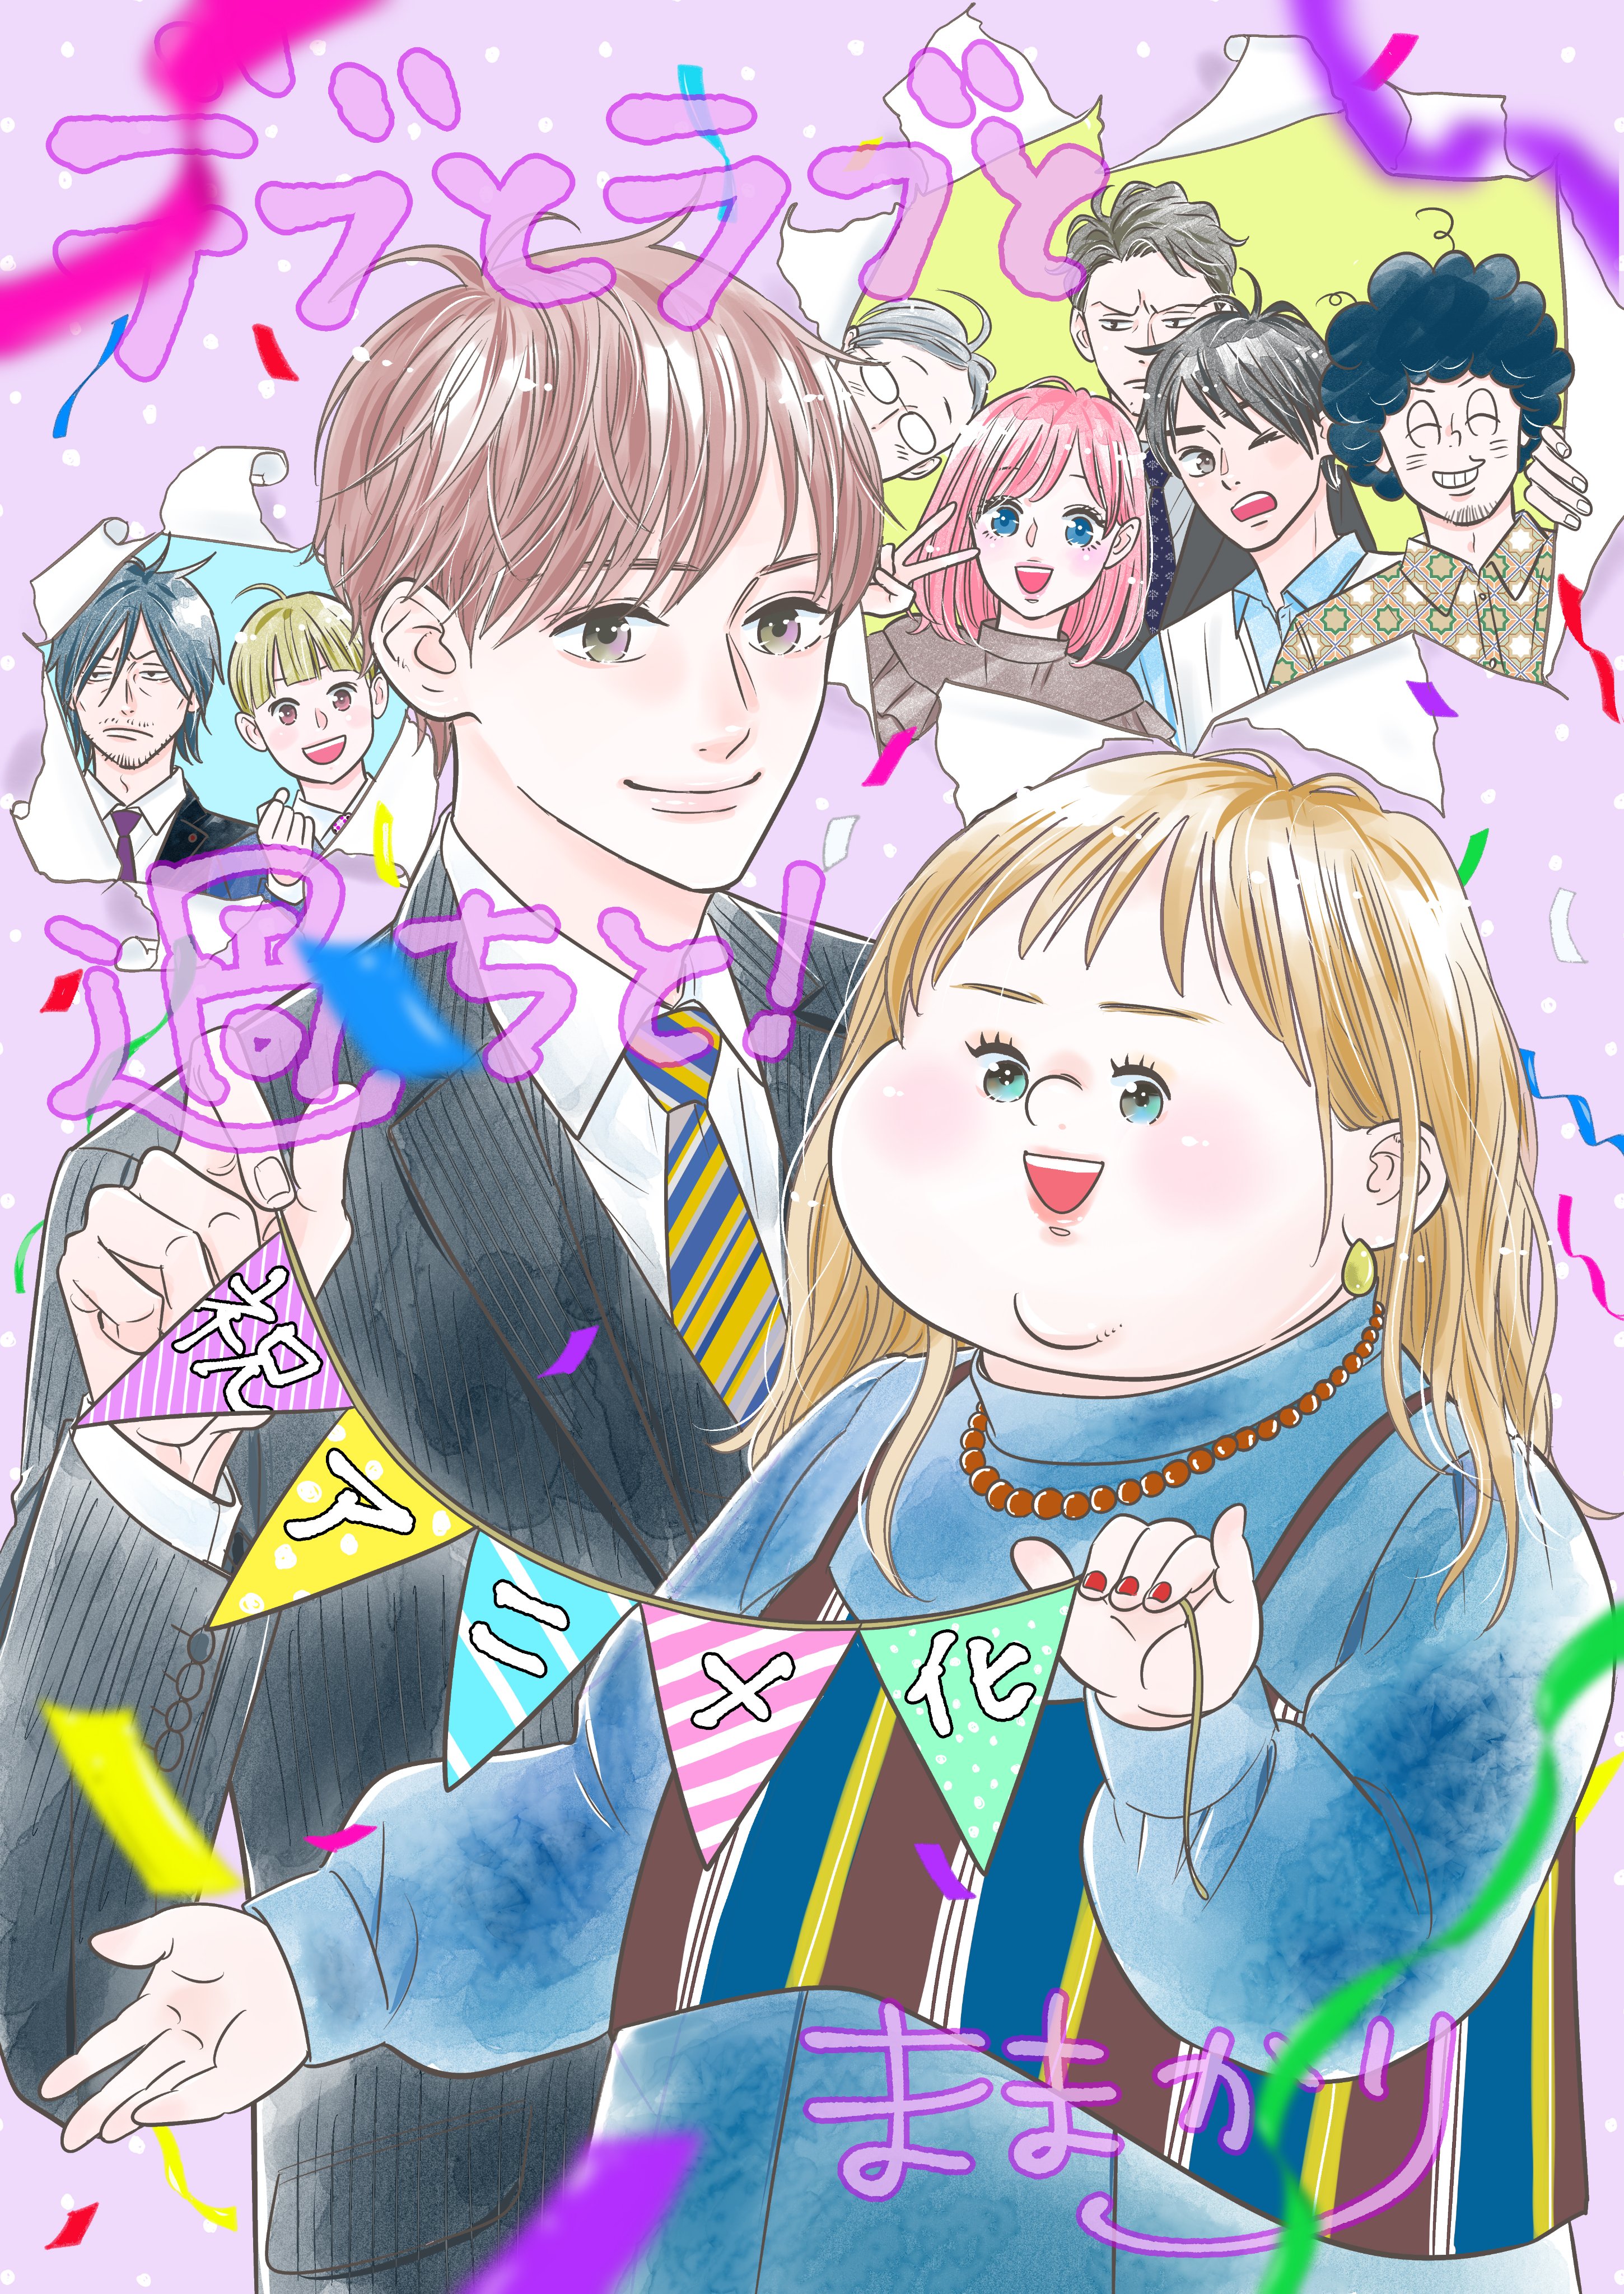 Plus-sized Misadventures in Love commemorative illustration by Mamakari